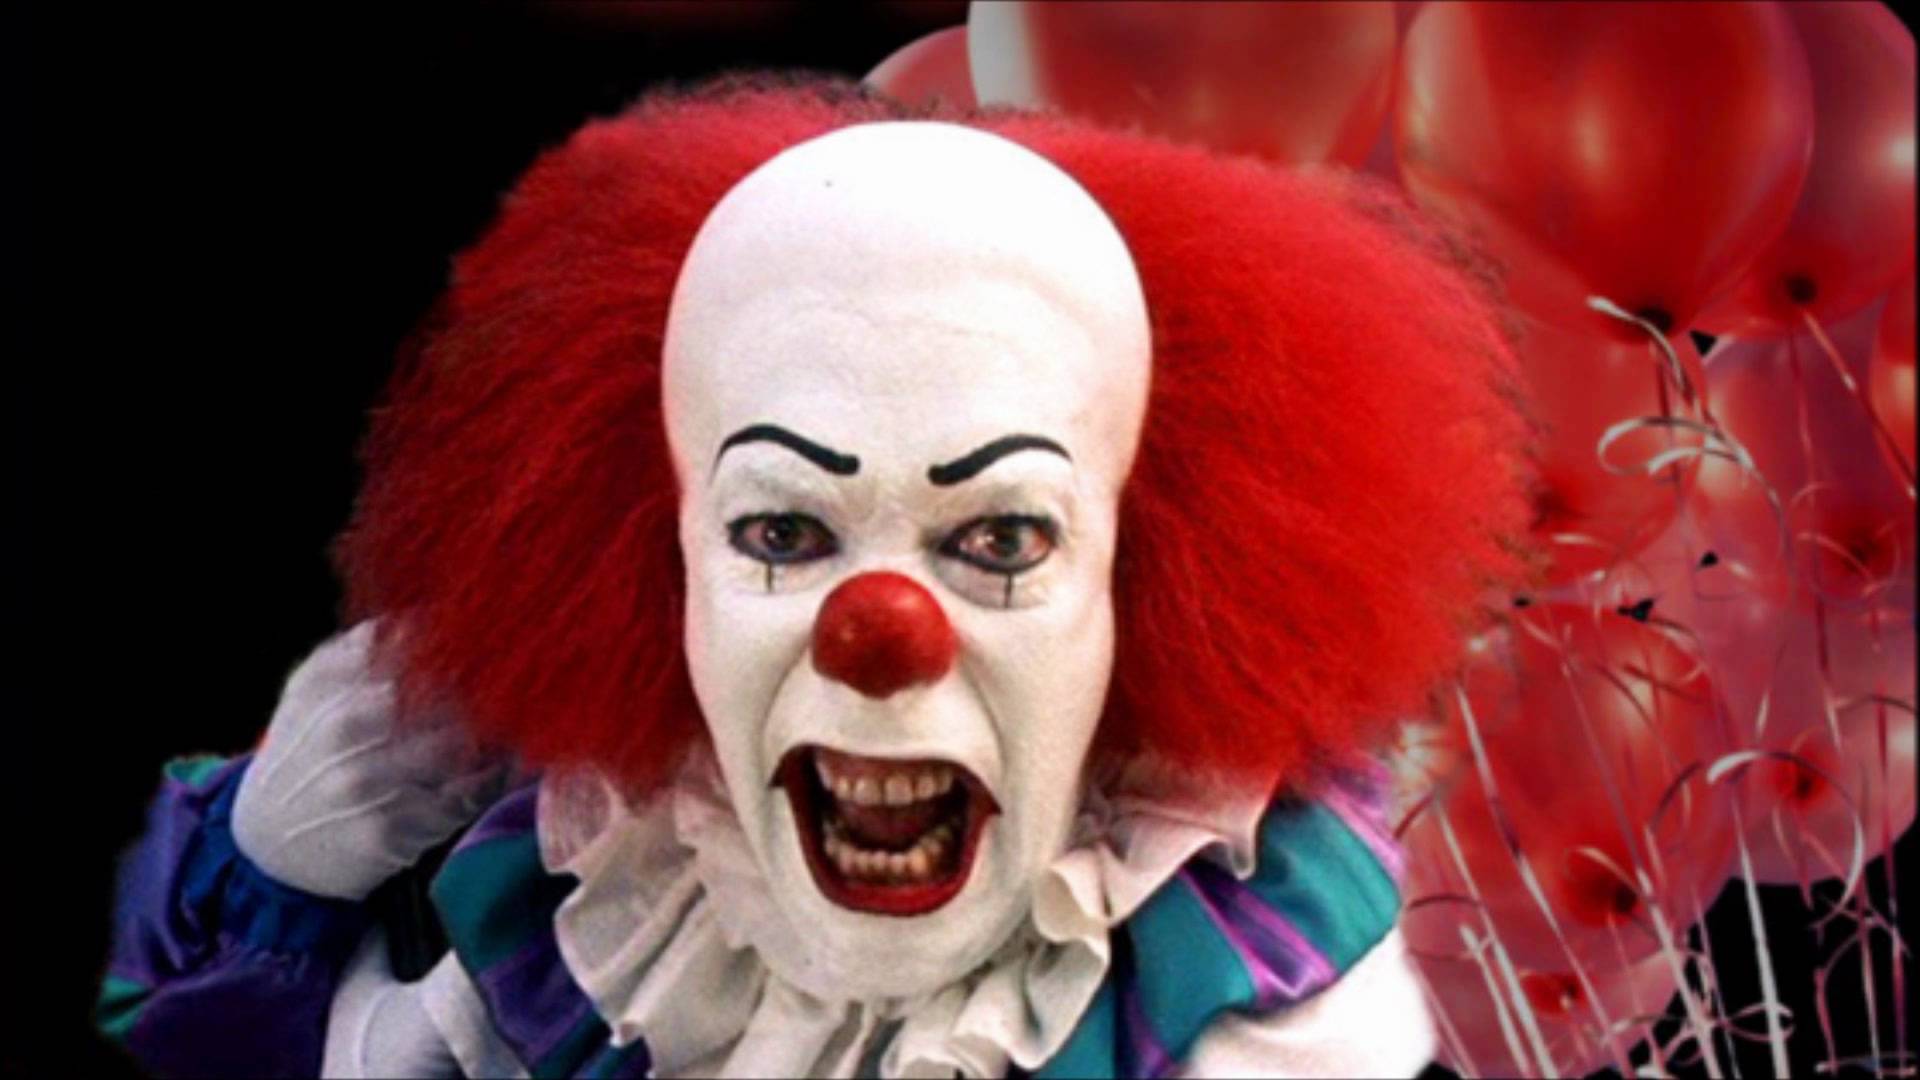 Will Poulter To Play Pennywise in Stephen King's 'IT'